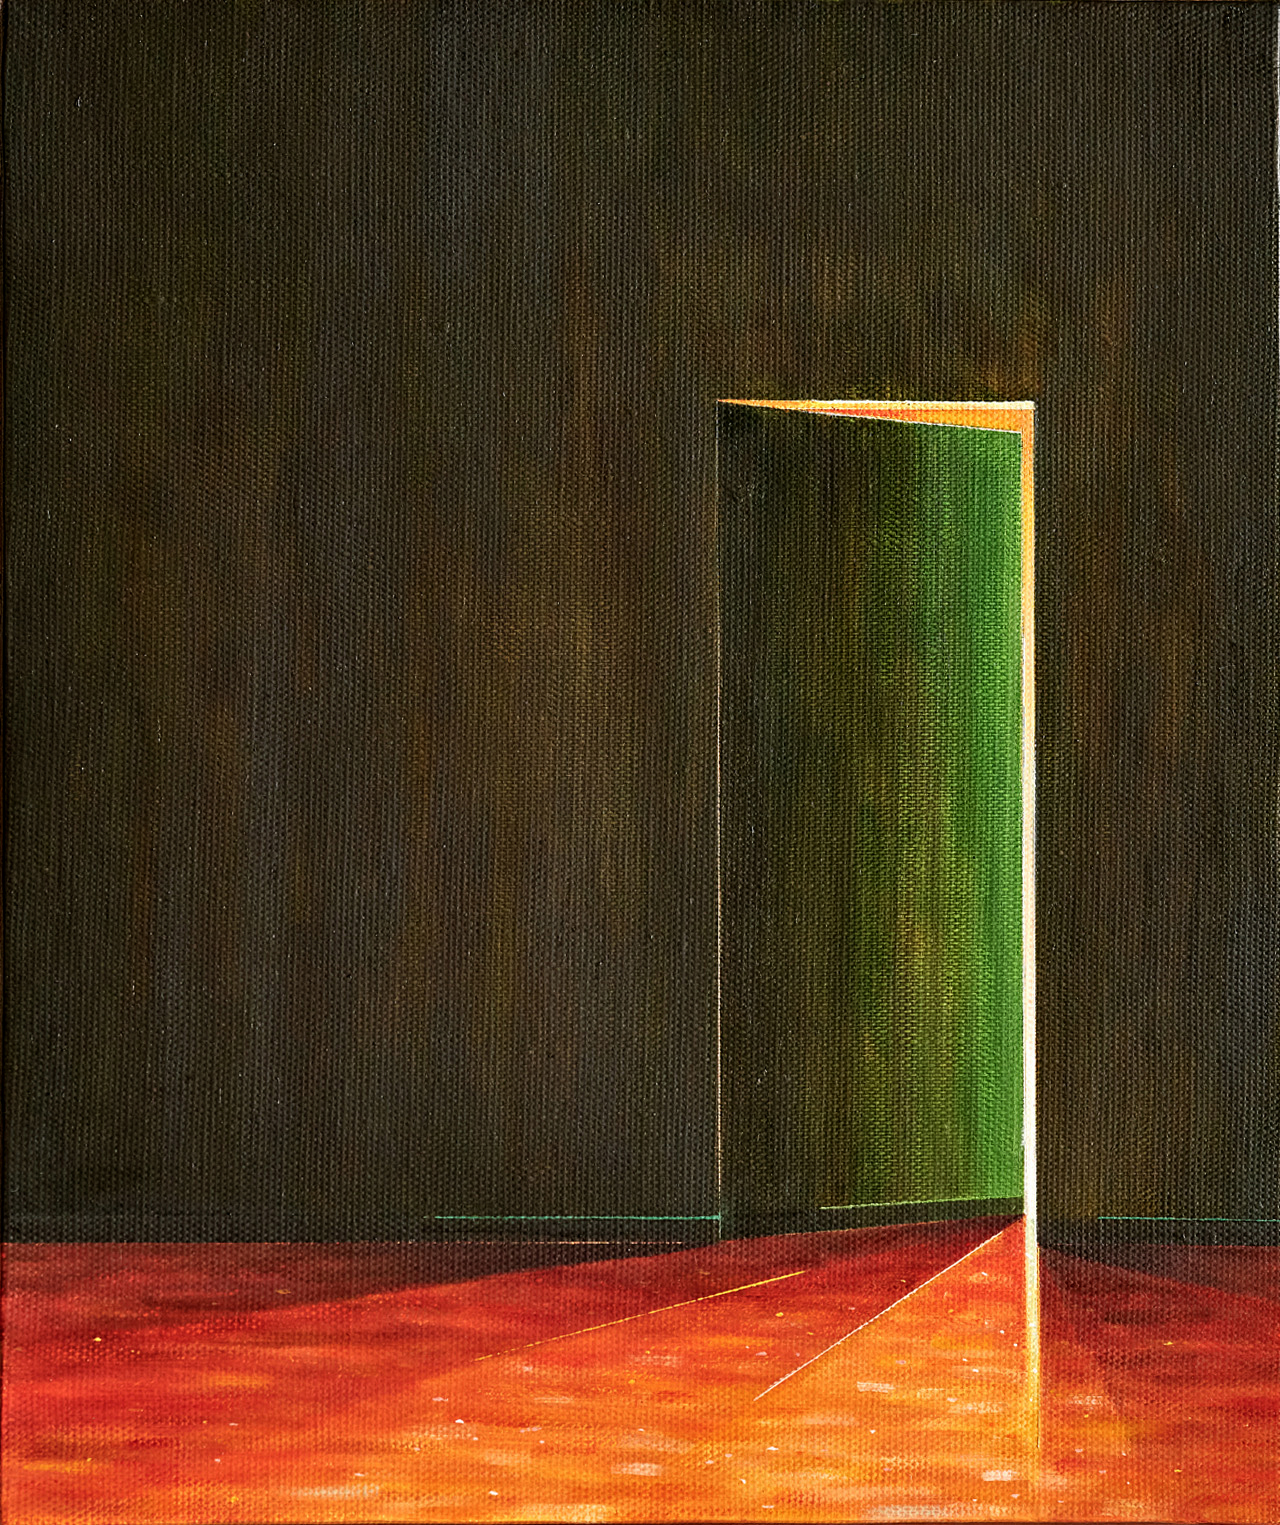 Szelit Cheung, Door VIII, Oil on linen, 30 x 25.3 cm, 2023, Artworks © The Artist, Courtesy of Schoeni Projects and THE SHOPHOUSE, Photo by Nick Smith